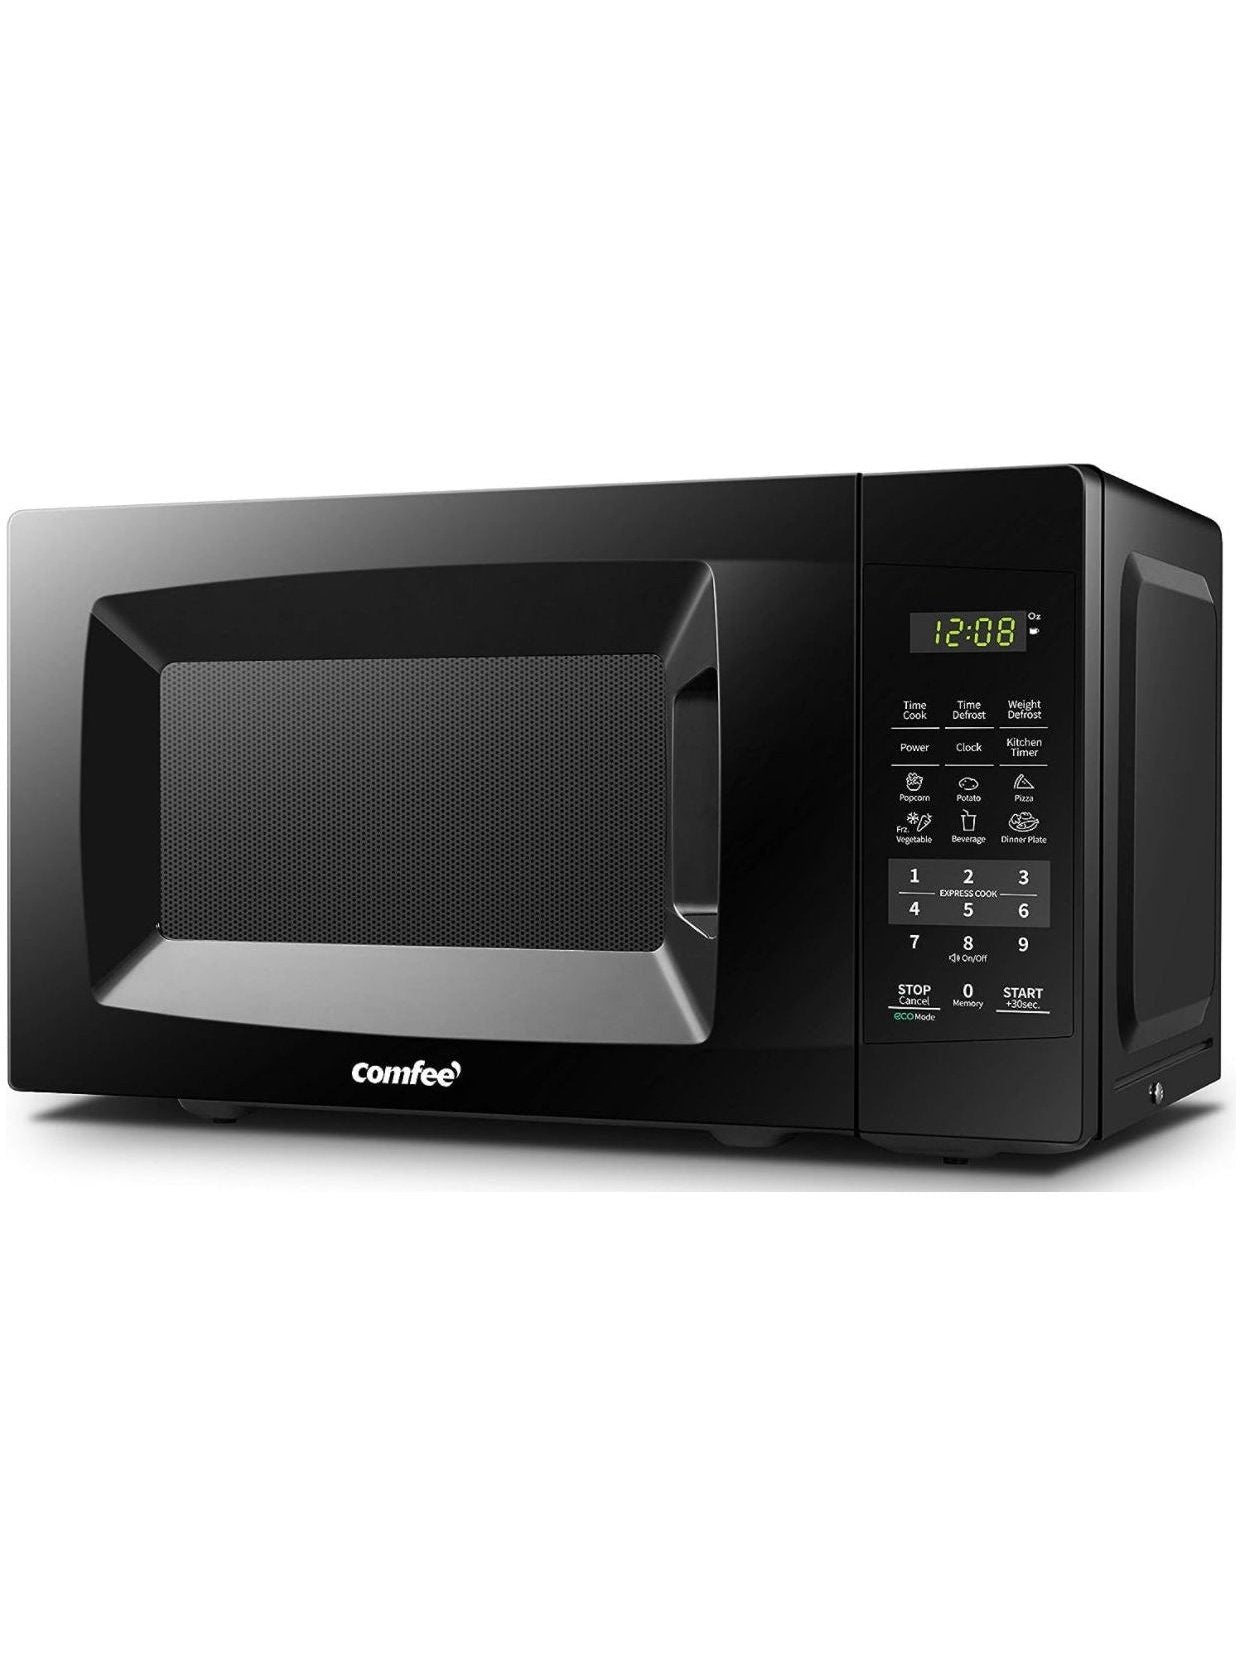 COMFEE' EM720CPL-PMB Countertop Microwave Oven with Sound On/Off, ECO Mode and Easy One-Touch Buttons, 0.7cu.ft, 1050W , Black